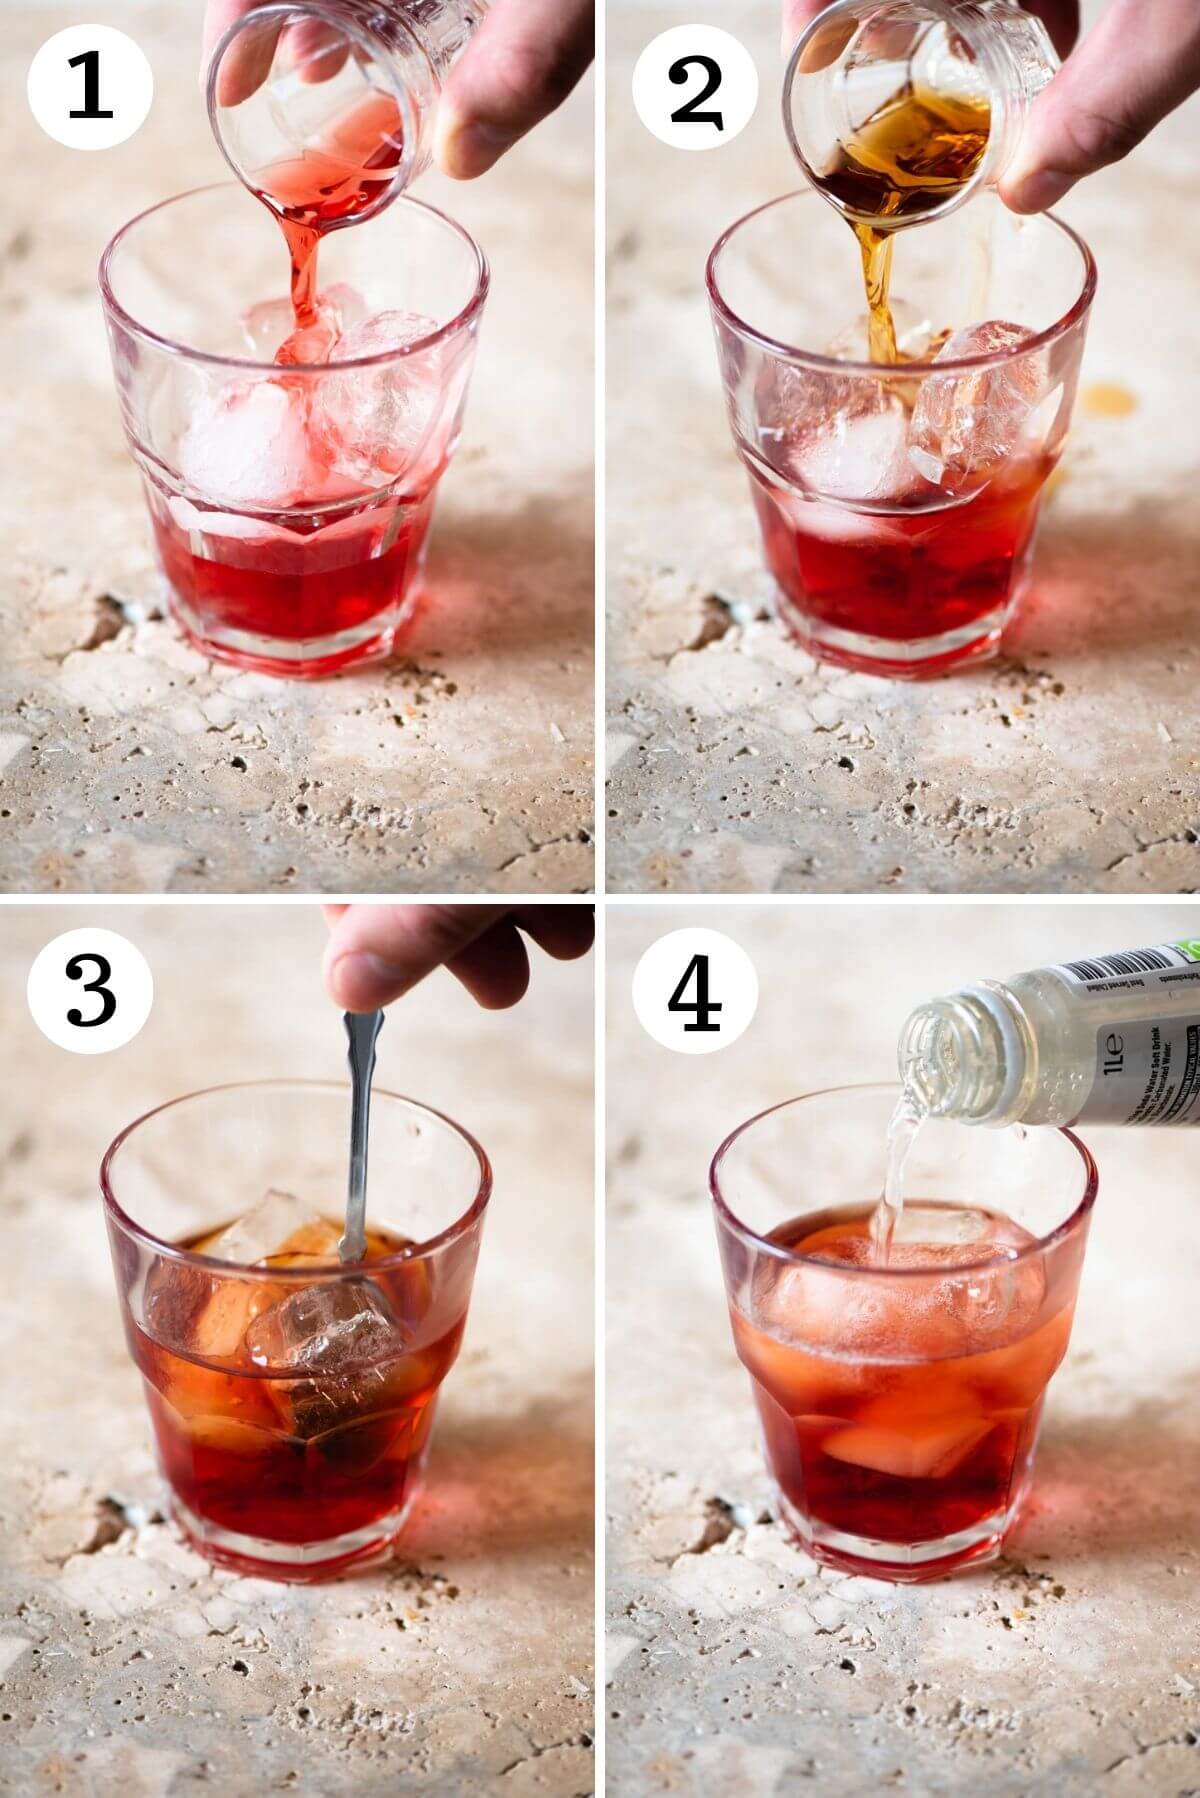 Step by step photos showing how to make an Americano cocktail